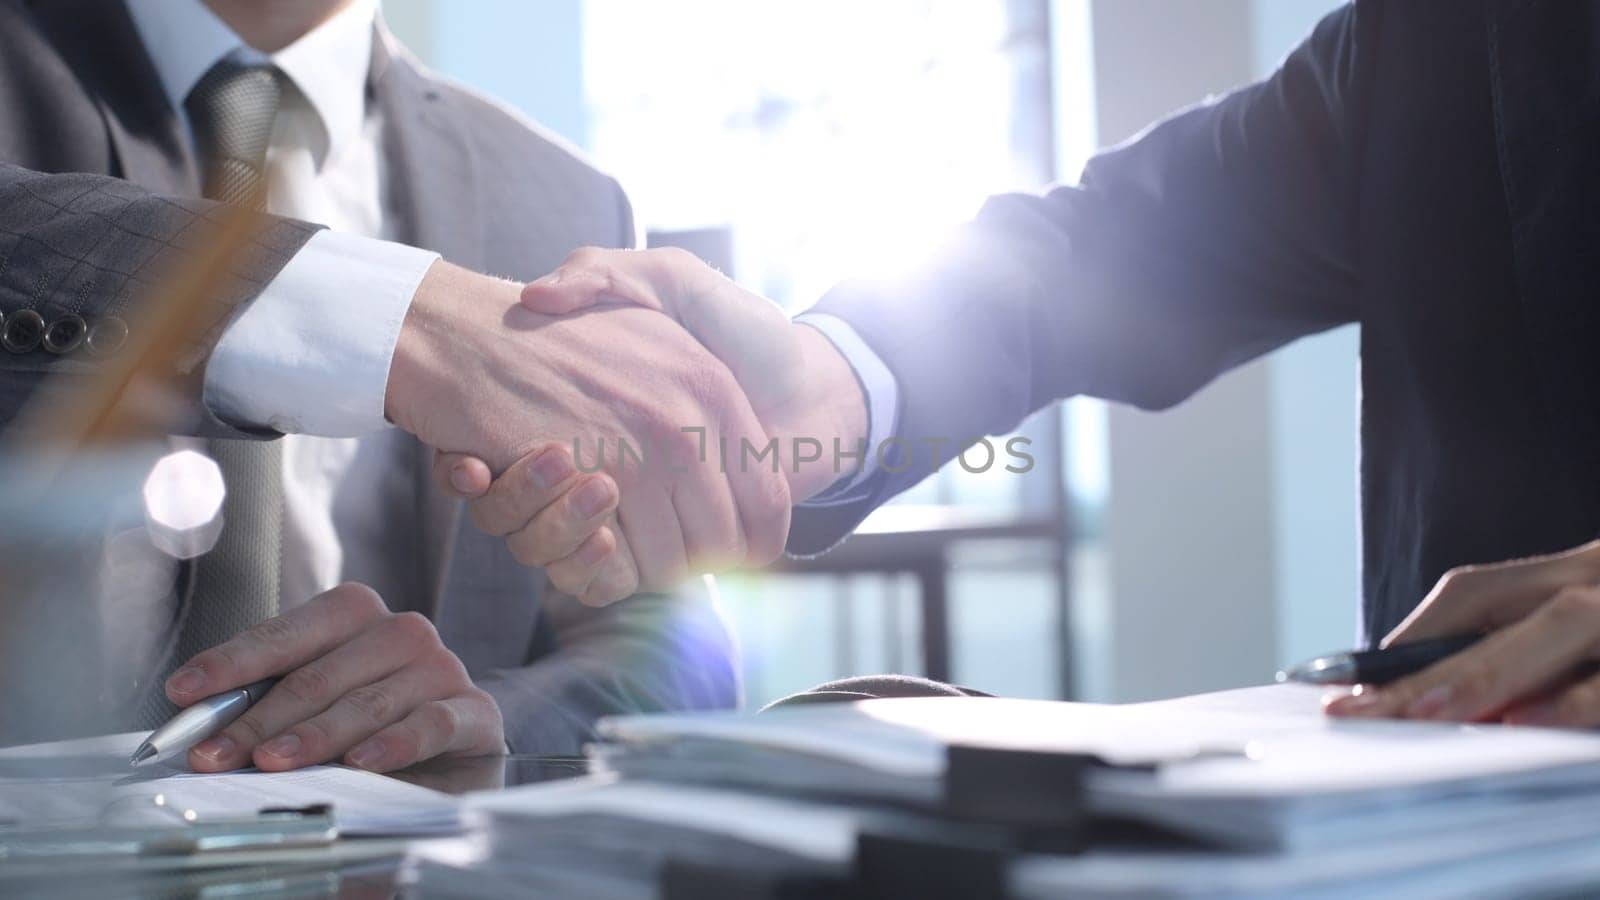 Signing documents at a meeting, business handshake by Prosto